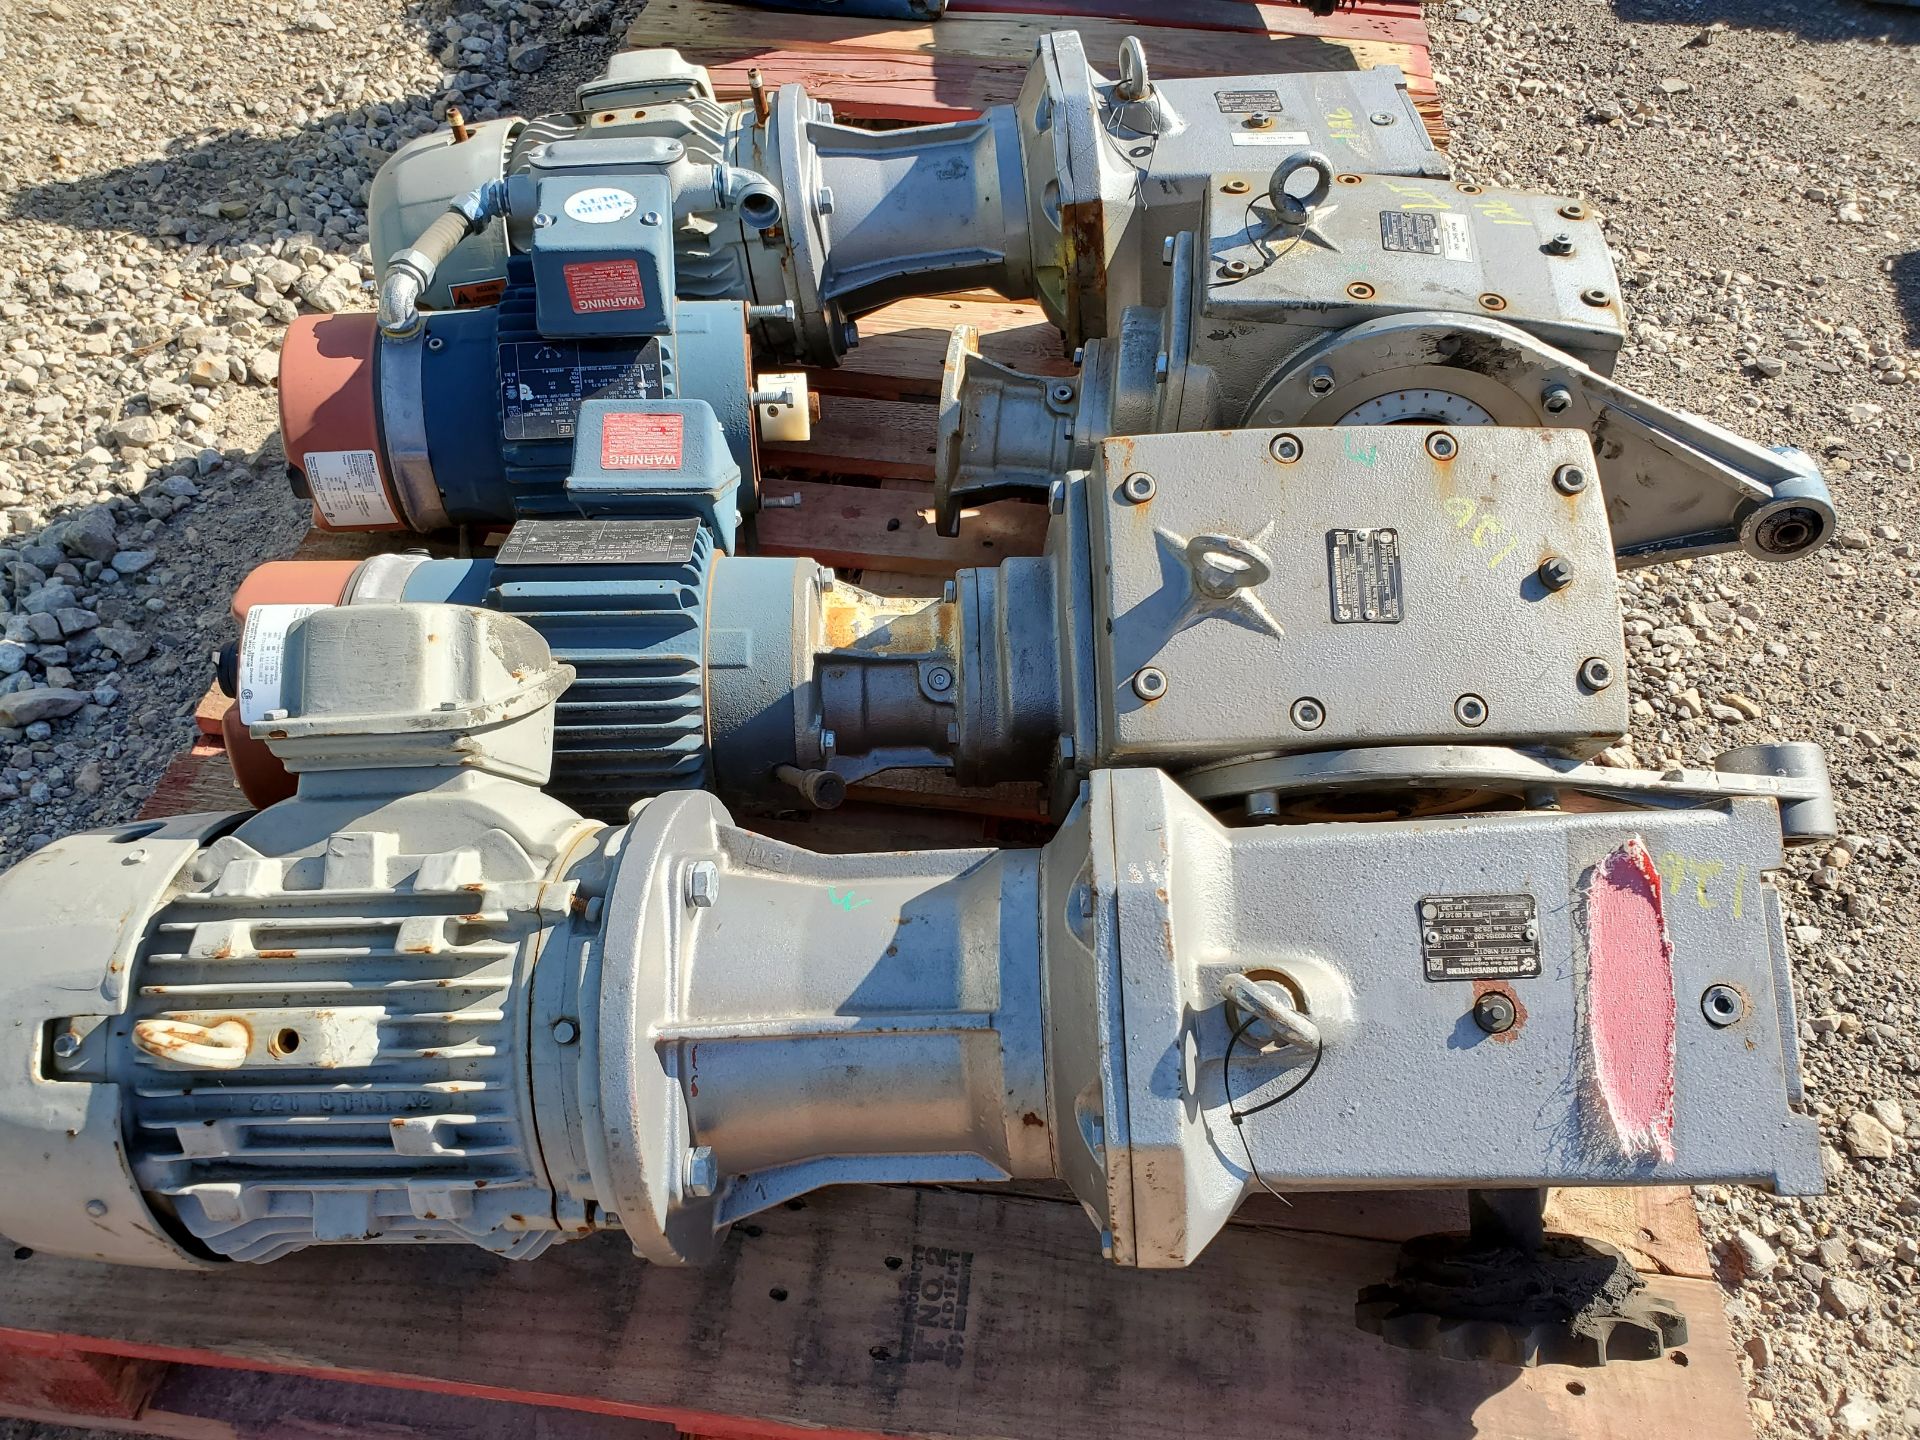 (4) NORD DRIVESYSTEMS 25.39:1 GEAR REDUCERS WITH GE 1 HP ELECTRIC MOTORS - Image 3 of 8